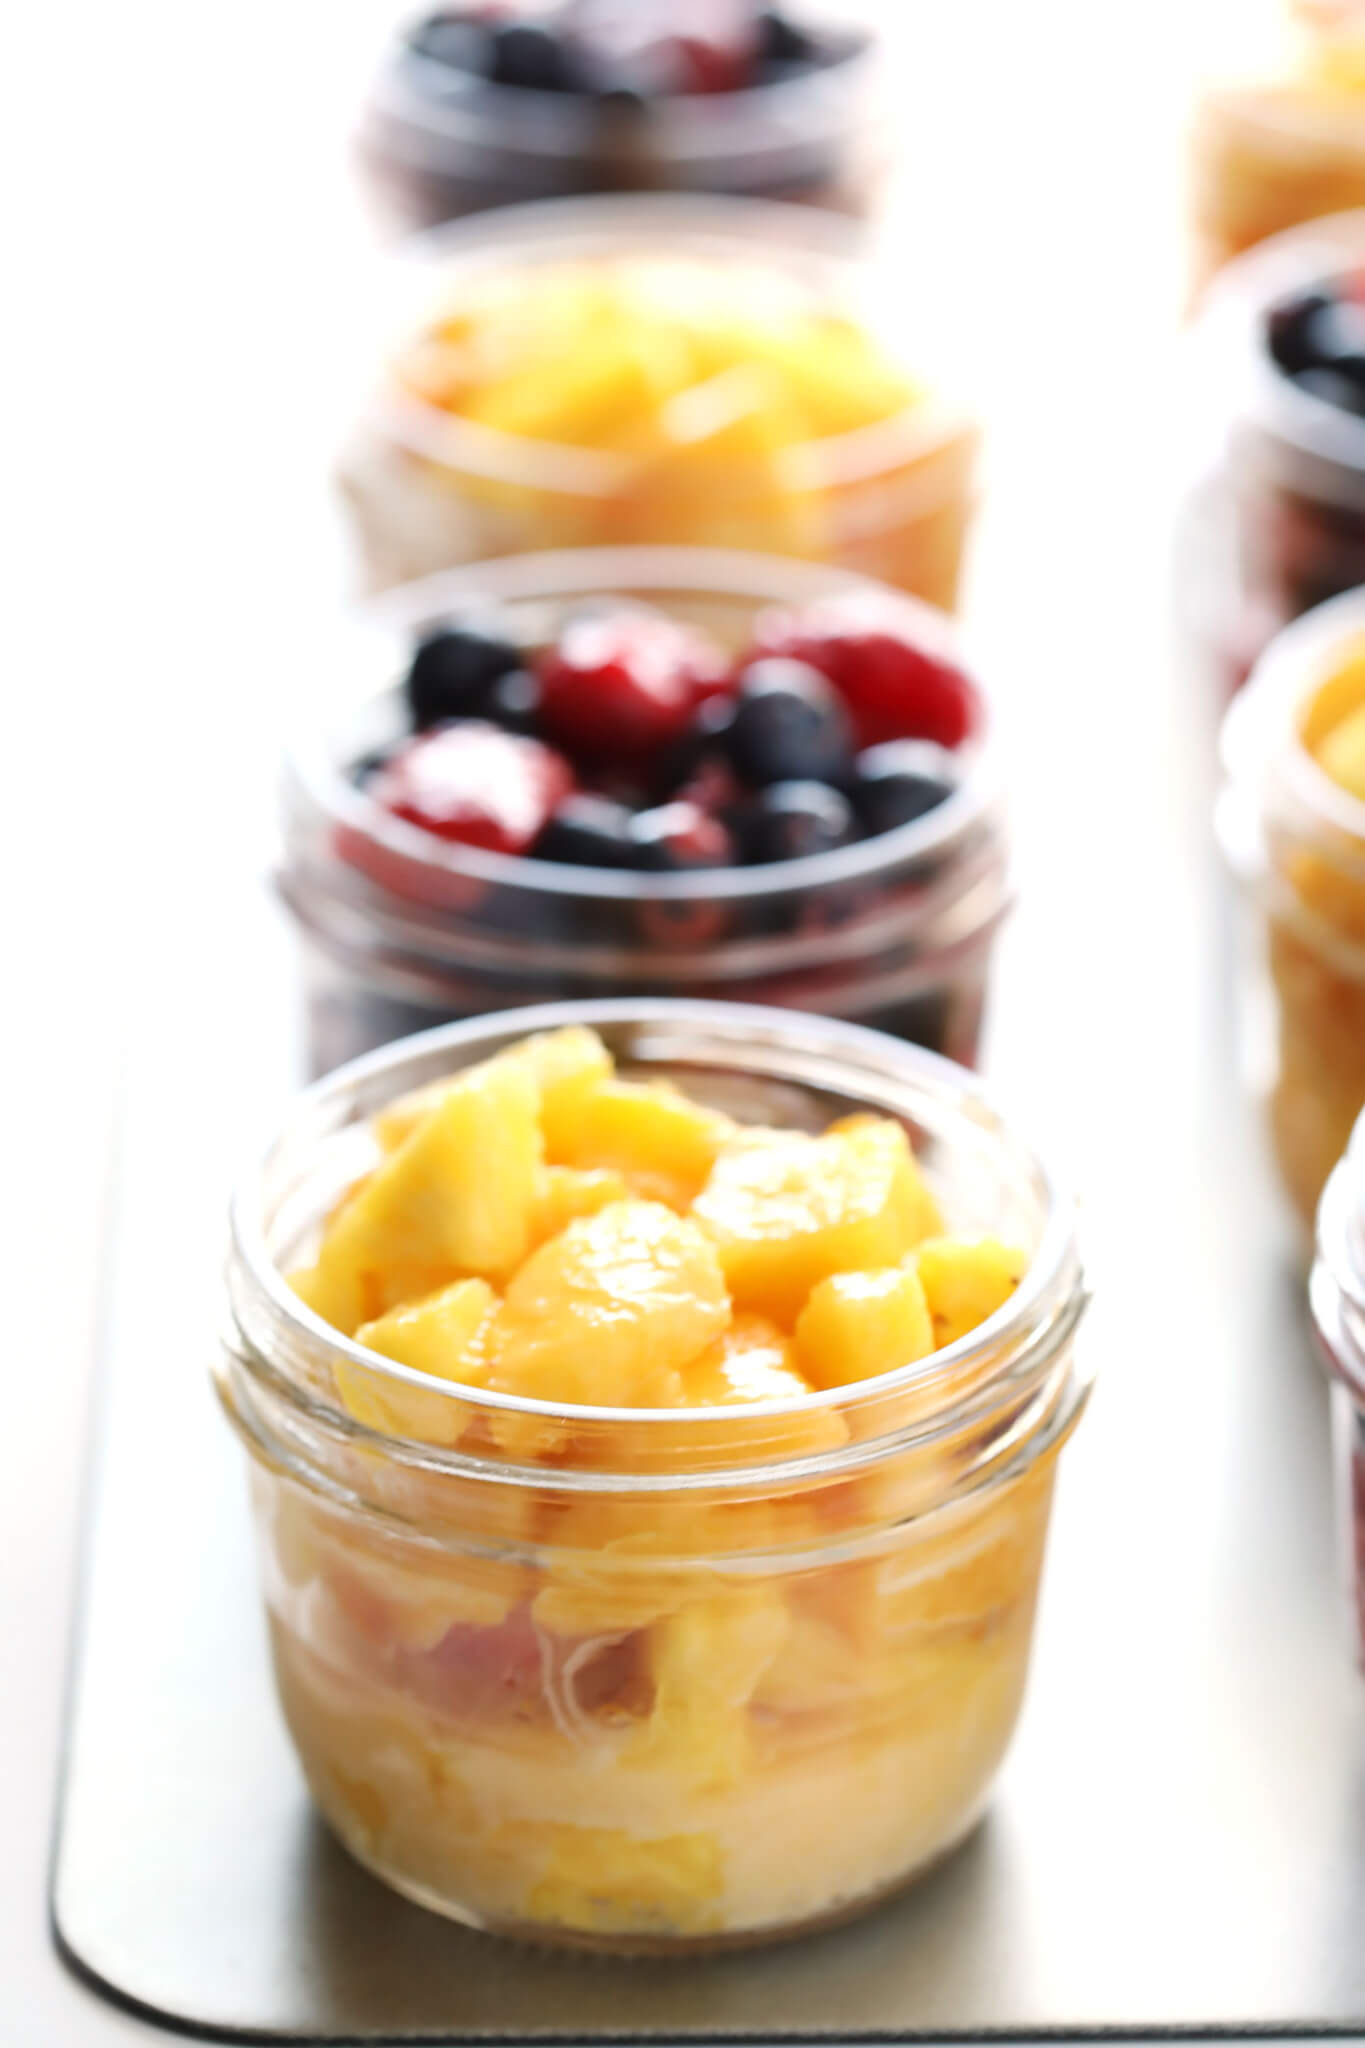 These delicious Mini Mason Jar Fruit Crisps can be made with your favorite seasonal fruit (peaches, berries, apples, pineapple, you choose!), and topped with a delicious oatmeal-almond crumble. A quick and easy and DELICIOUS dessert! | gimmesomeoven.com